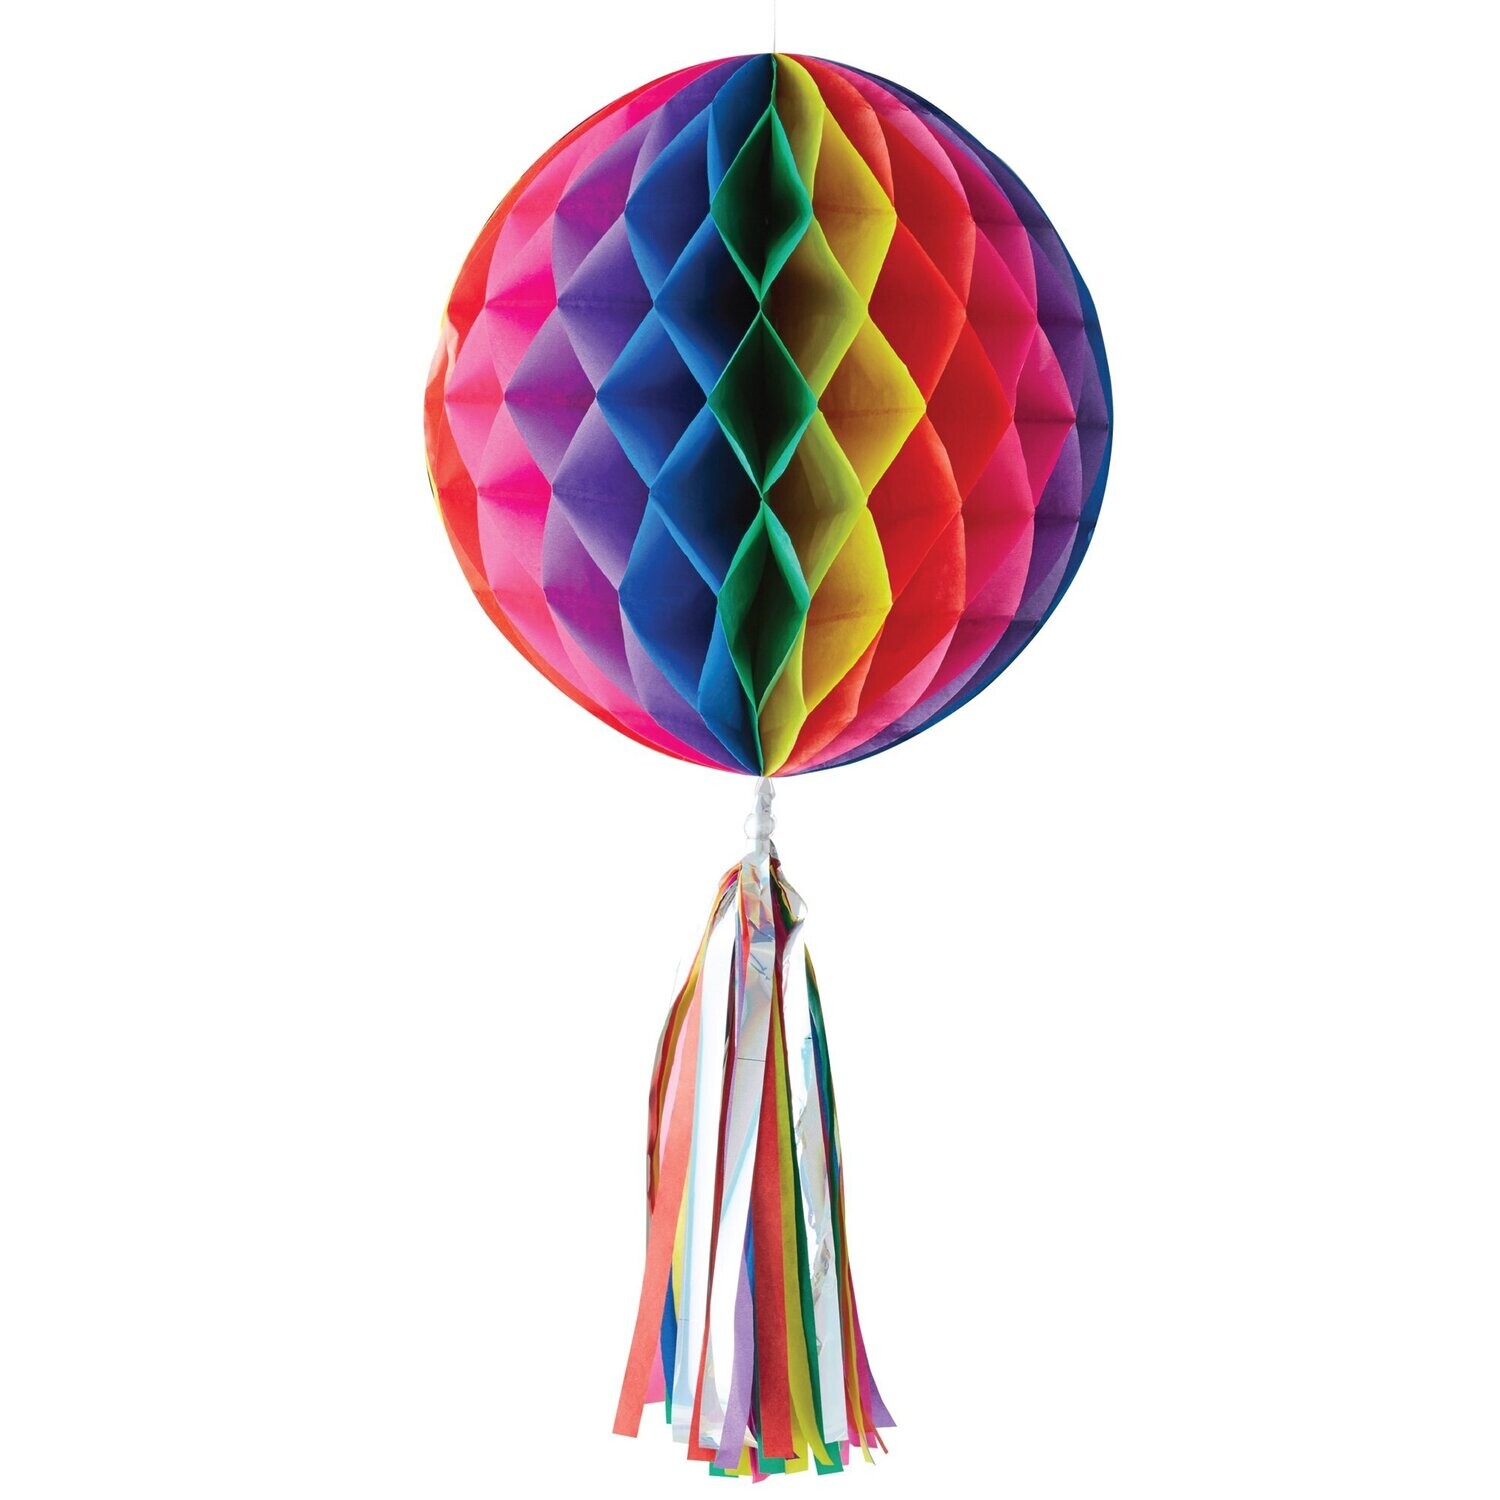 Honeycomb Ball with Tassel Multi Color